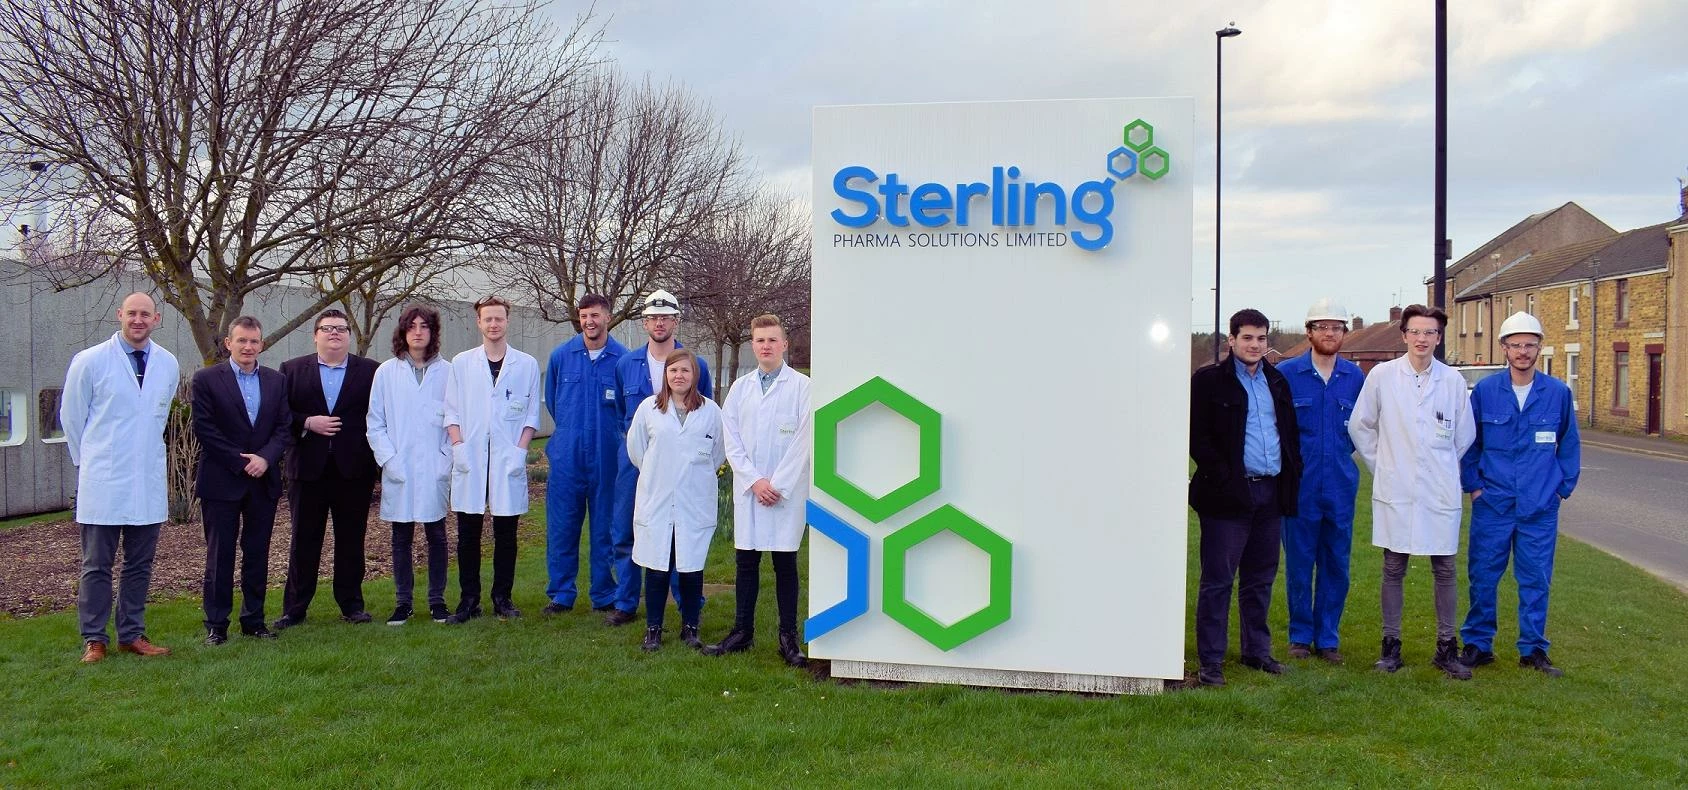 From left to right: Chris Wiper, training manager at Sterling, Kevin Cook, CEO of Sterling Pharma an